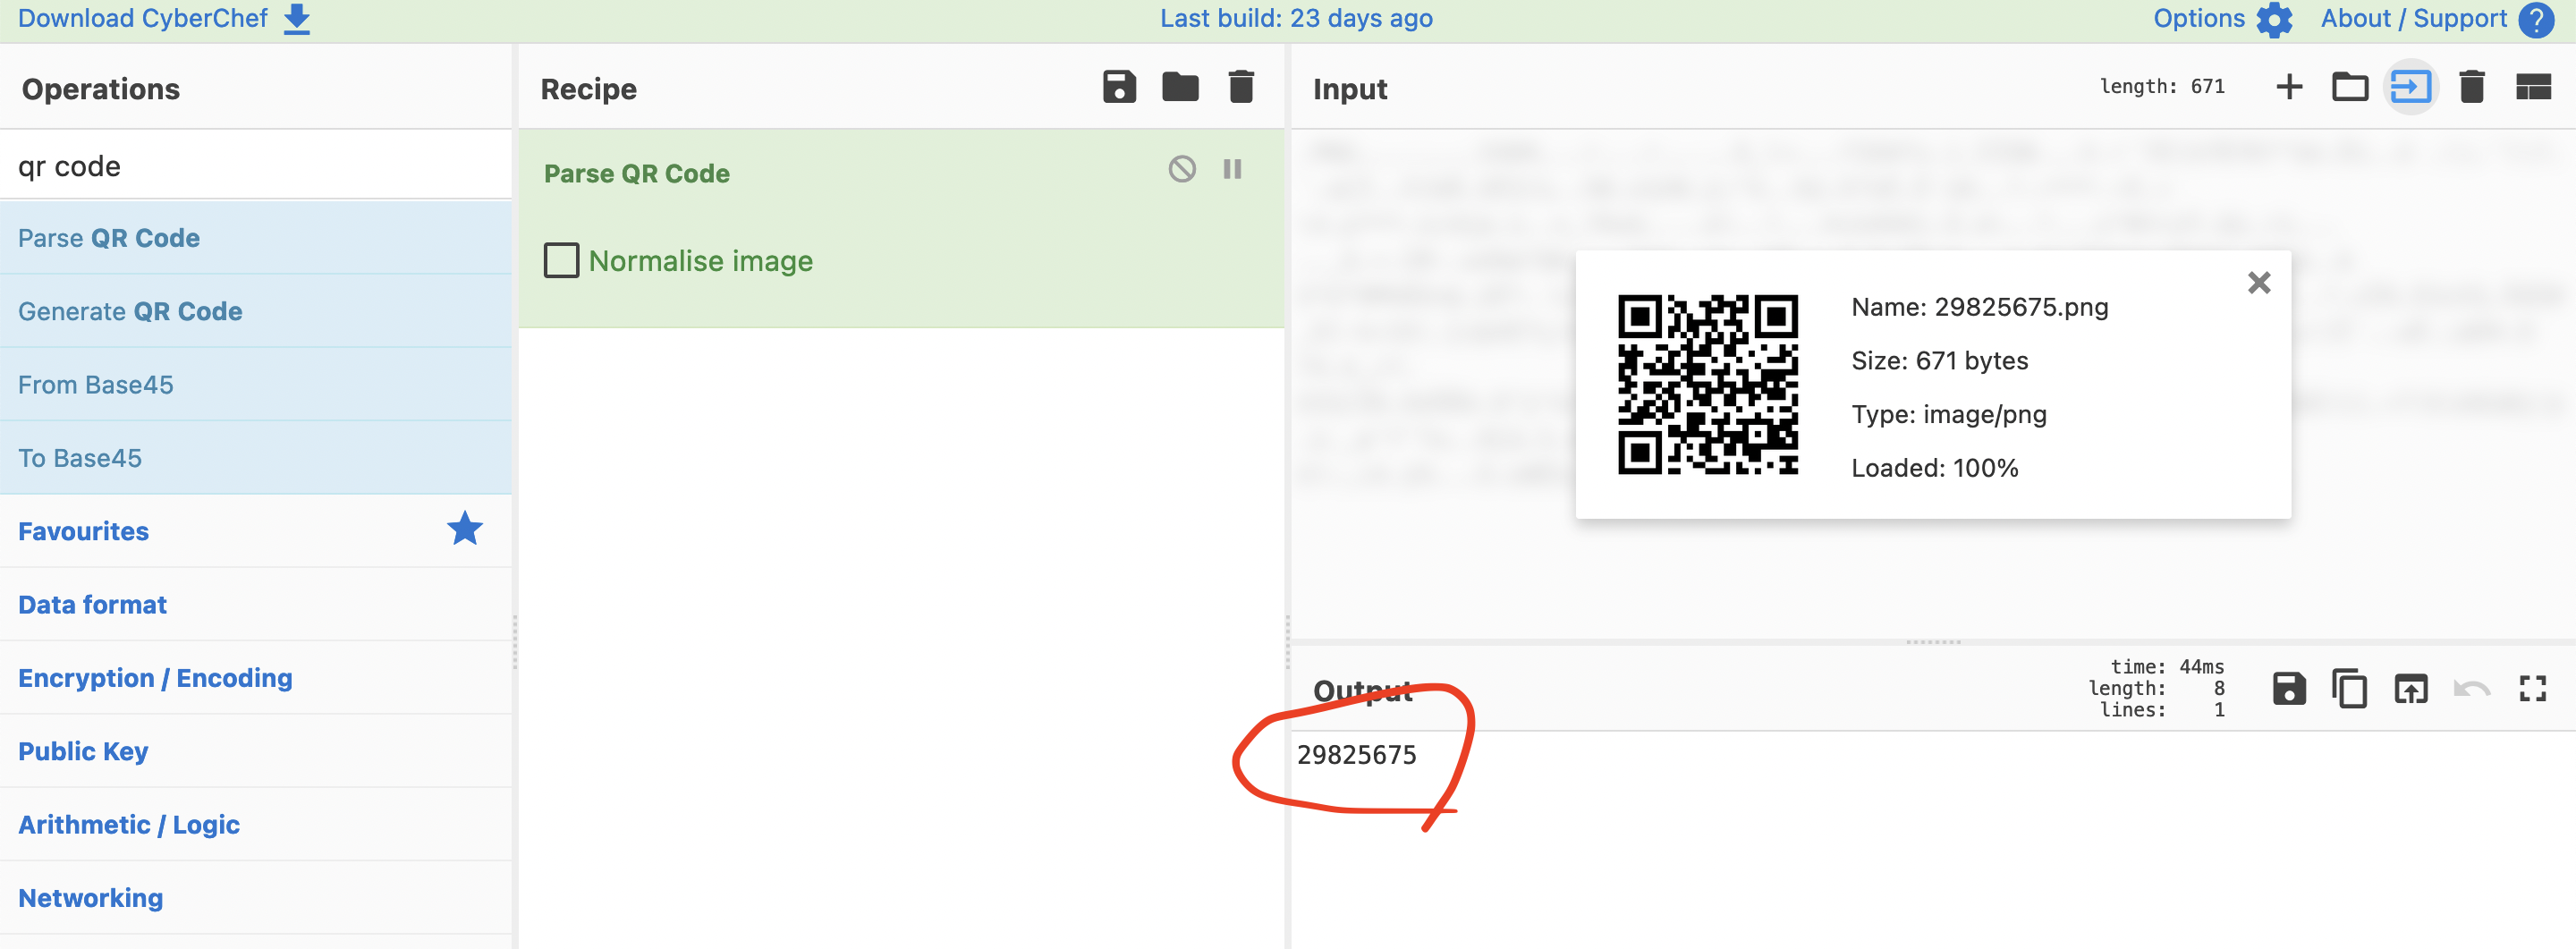 numeric id from parsed QR code in cyberchef